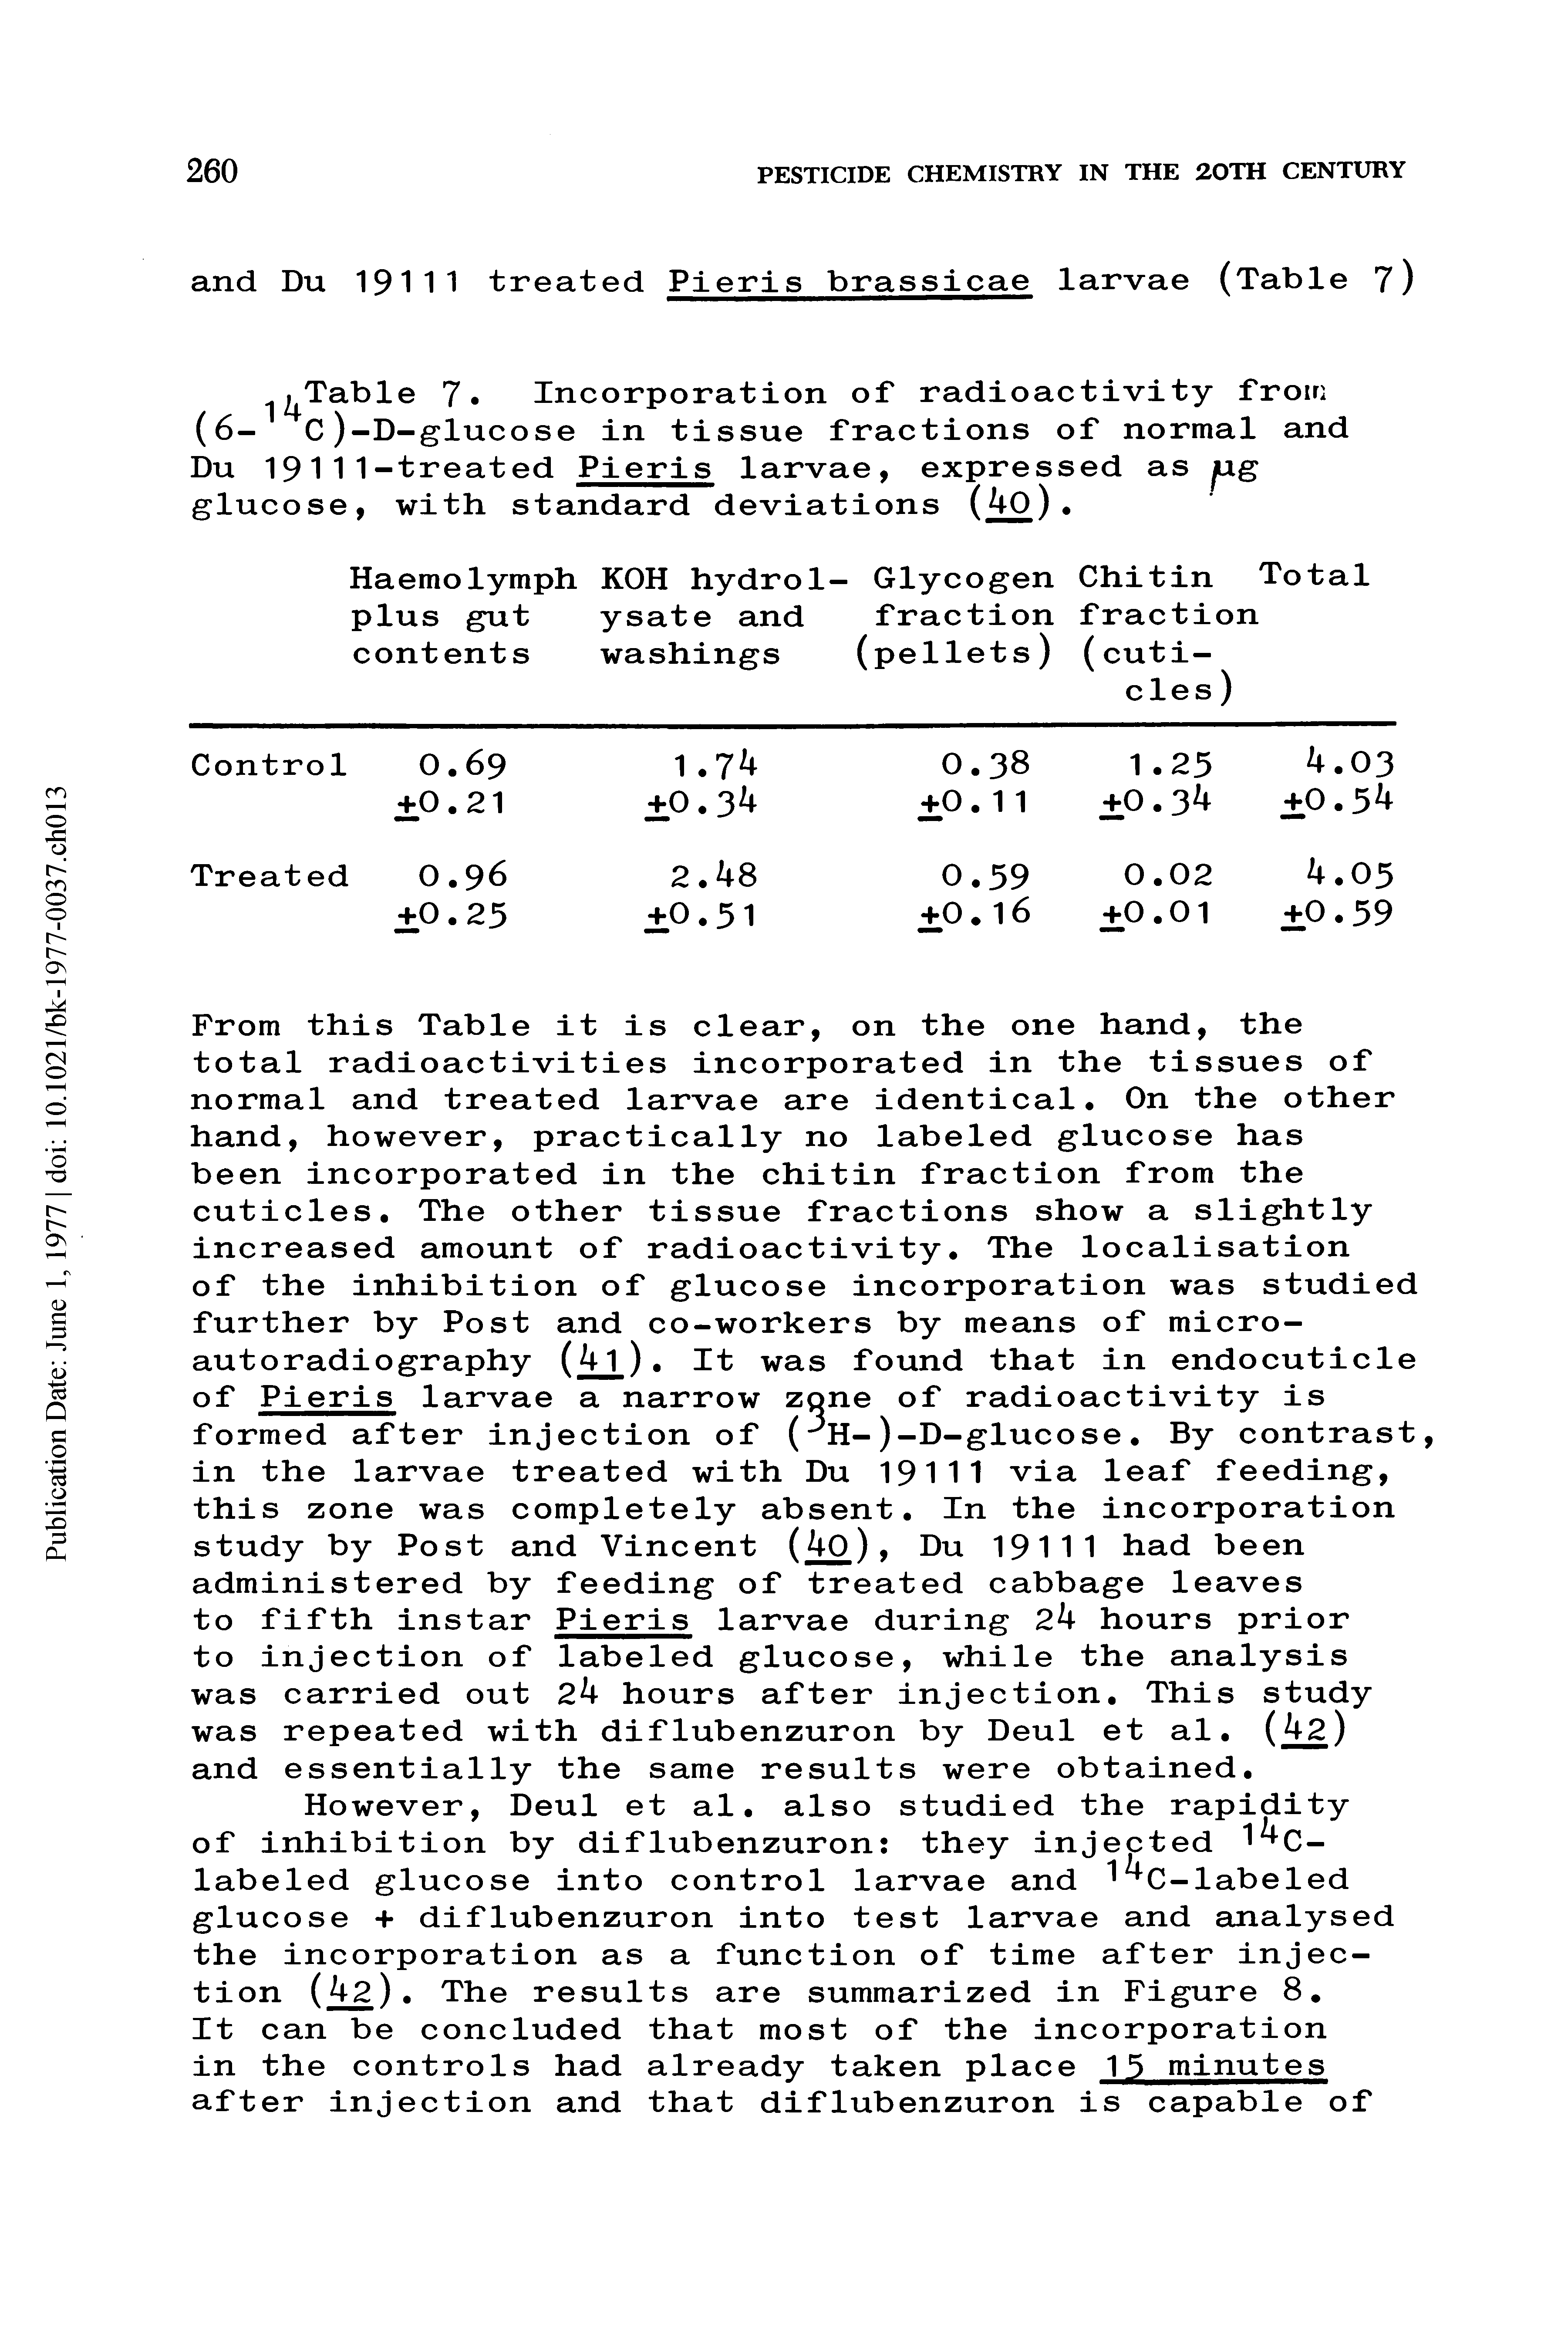 Table 7. Incorporation of radioactivity from (6- C)-D-glucose in tissue fractions of normal and Du 19111-treated Pieris larvae, expressed as jxg glucose, with standard deviations (40).